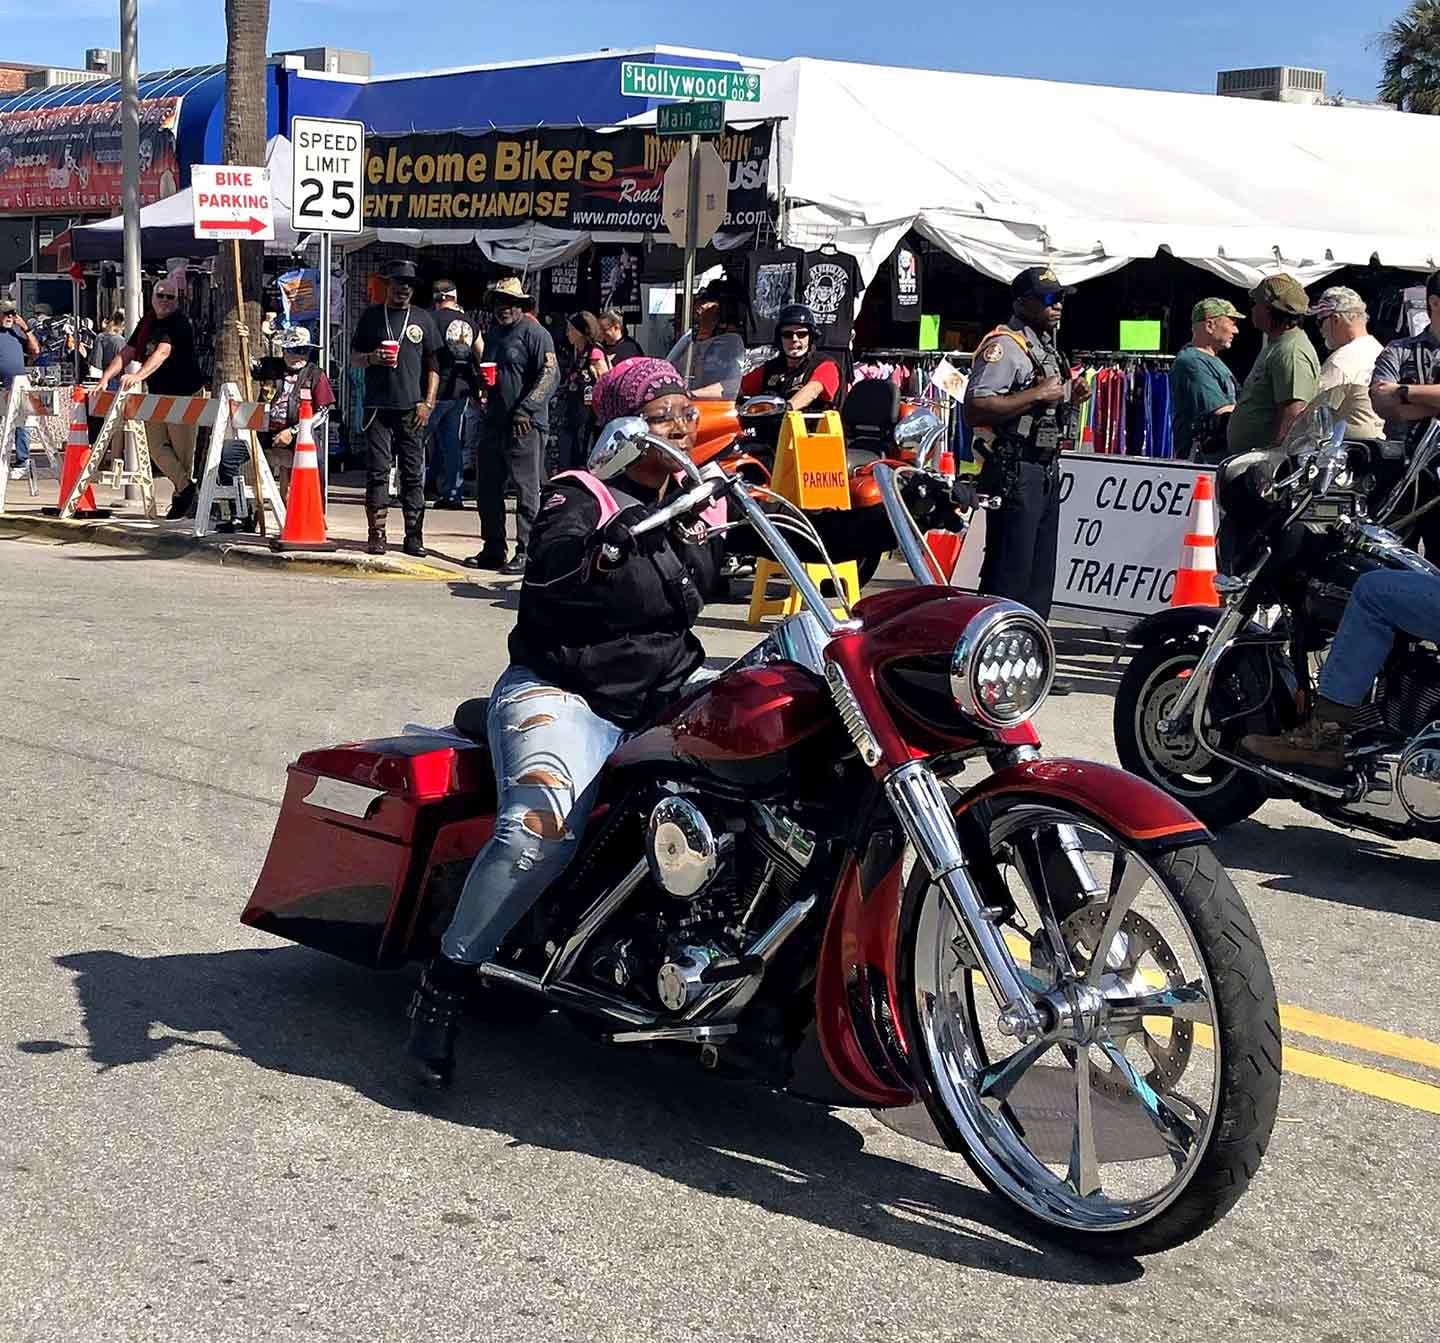 With March being National Women’s History month, it seemed appropriate that there was a noticeable increase in female riders at this year’s rally.